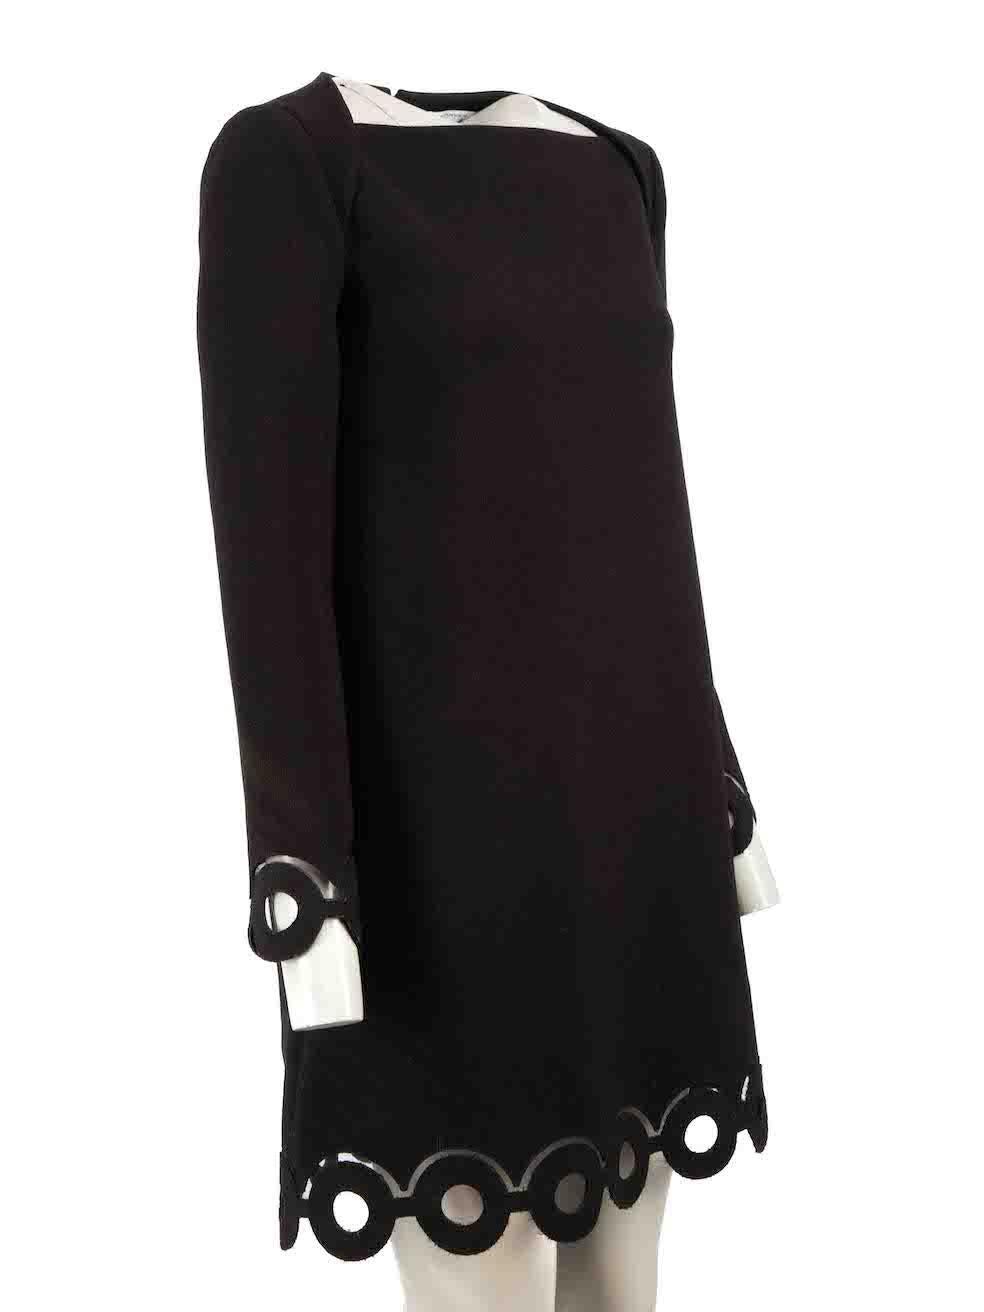 CONDITION is Very good. Minimal wear to dress is evident. Minimal pulls to overall fabric and minor fraying to hemlines on this used Carven designer resale item.

Details
Black
Synthetic
Dress
Mini
Long sleeves
Square neck
Cut out ring hem and cuff